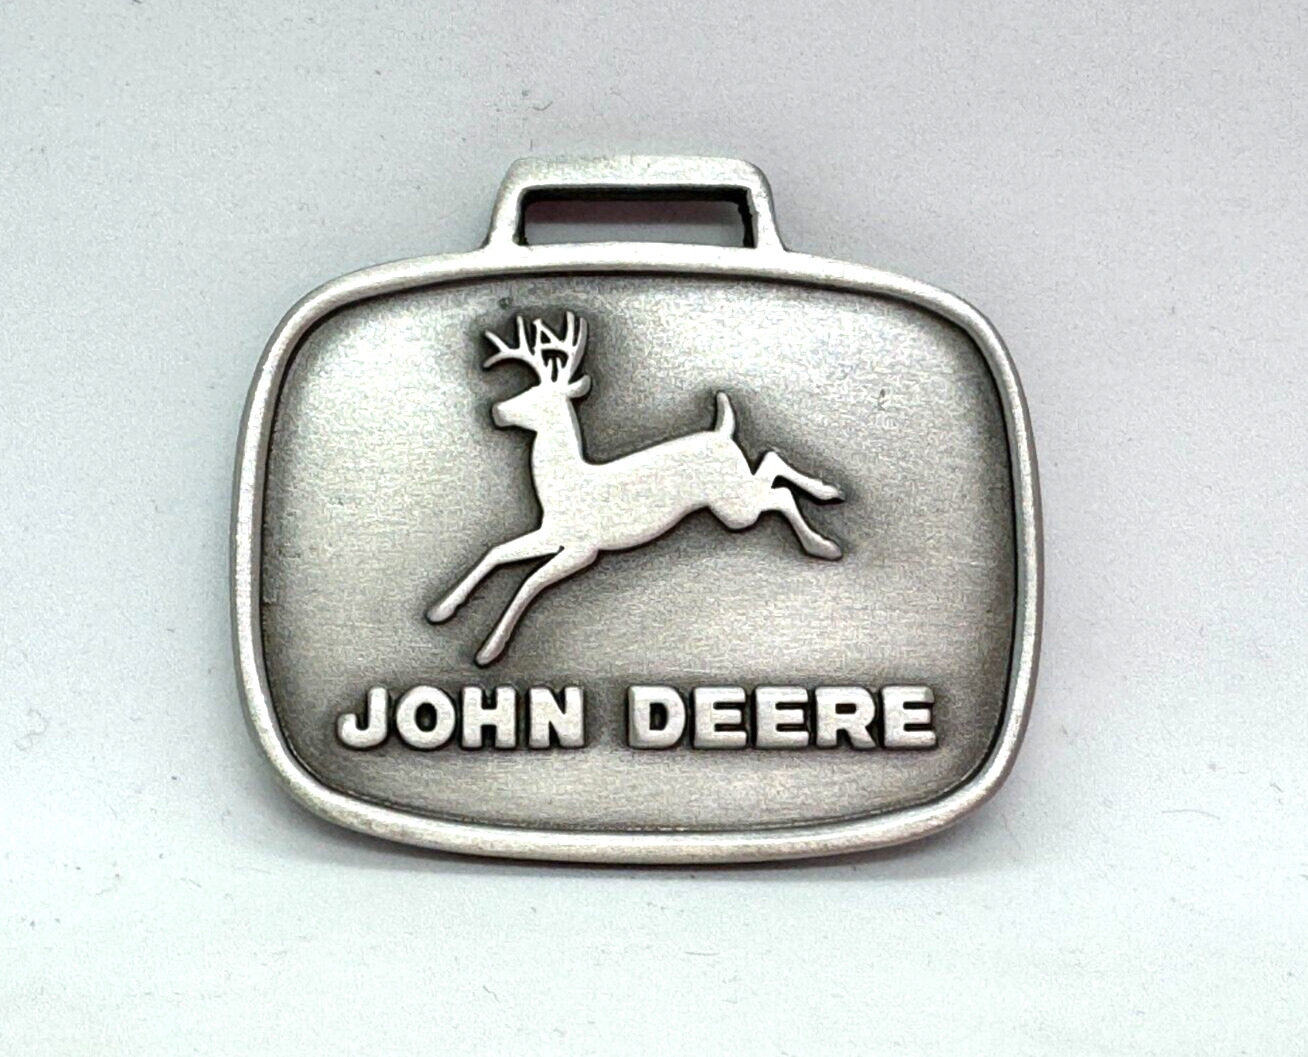 1956 John Deere Logo Watch Fob Trademark Series Officially Licensed Product NOS